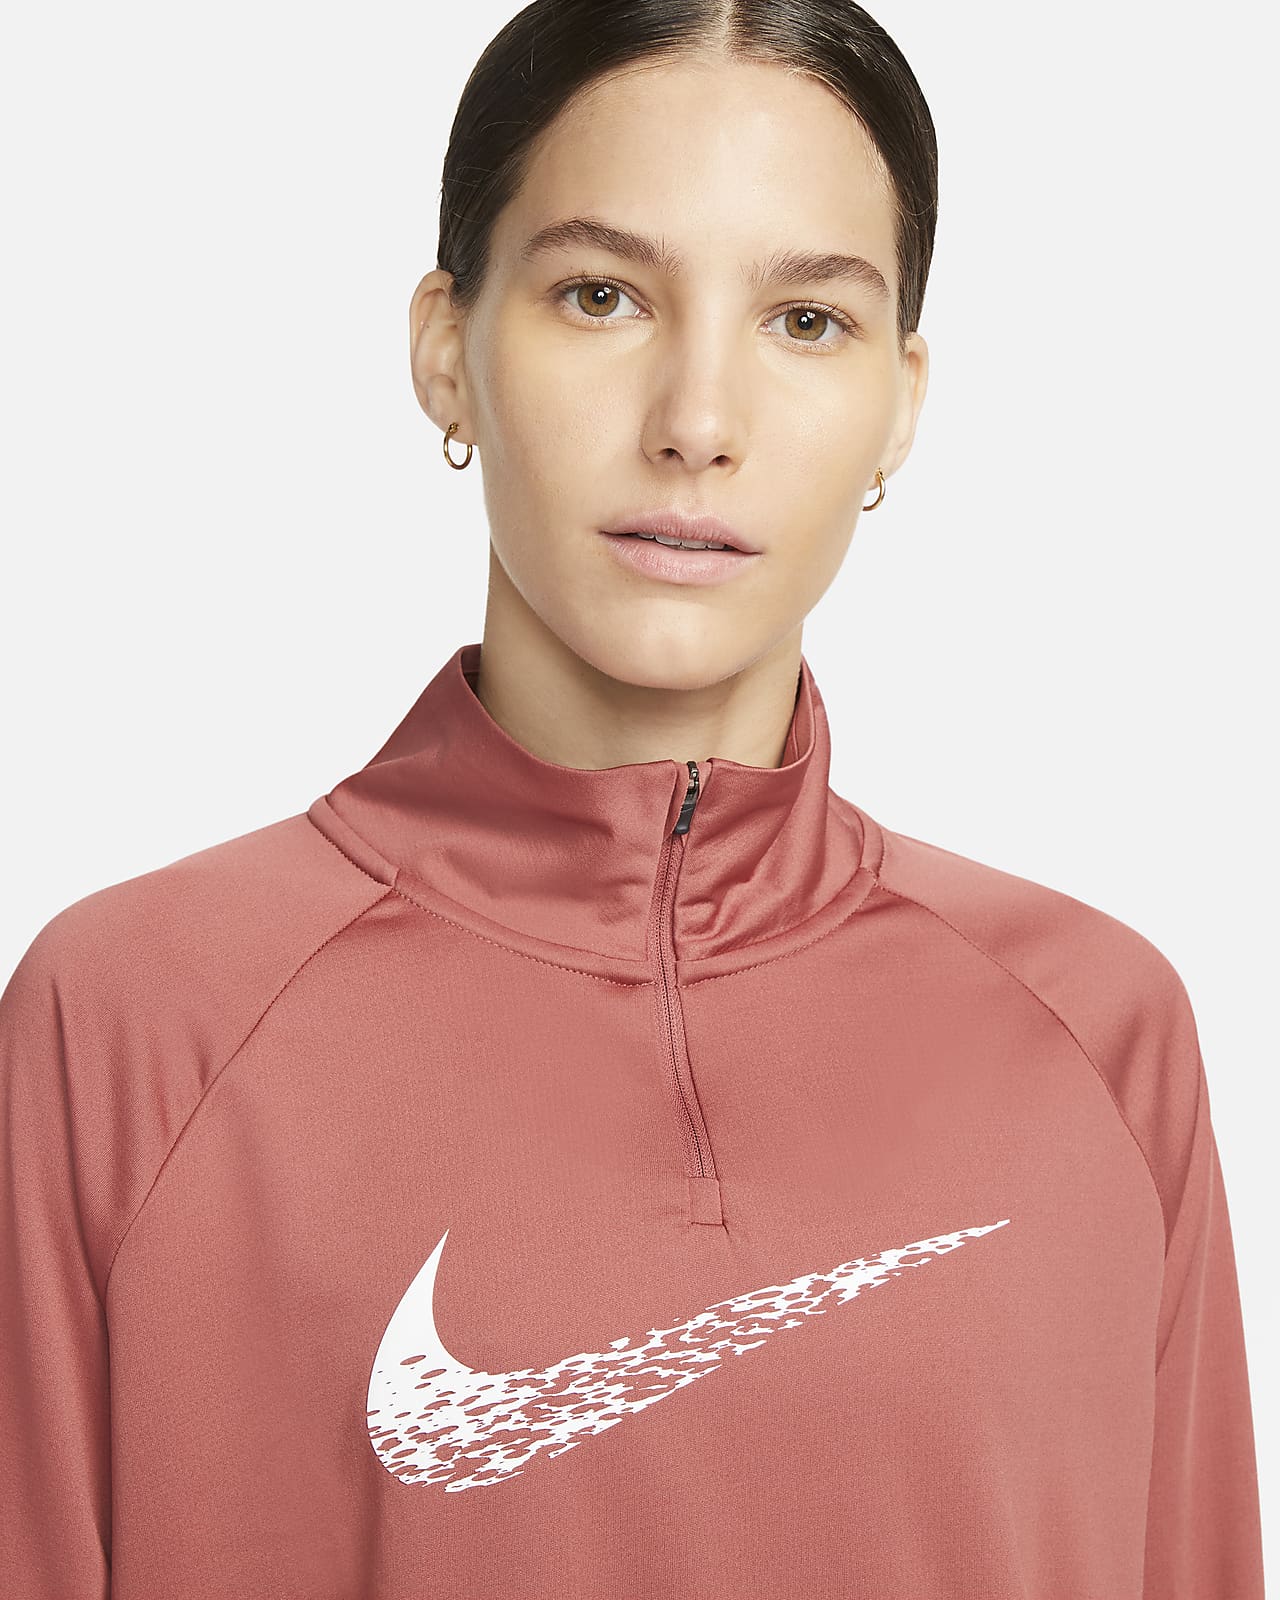 https://static.nike.com/a/images/t_PDP_1280_v1/f_auto,q_auto:eco/319fbbce-a0ec-4508-90e7-b415f9a15227/dri-fit-swoosh-run-running-midlayer-N0f47Z.png